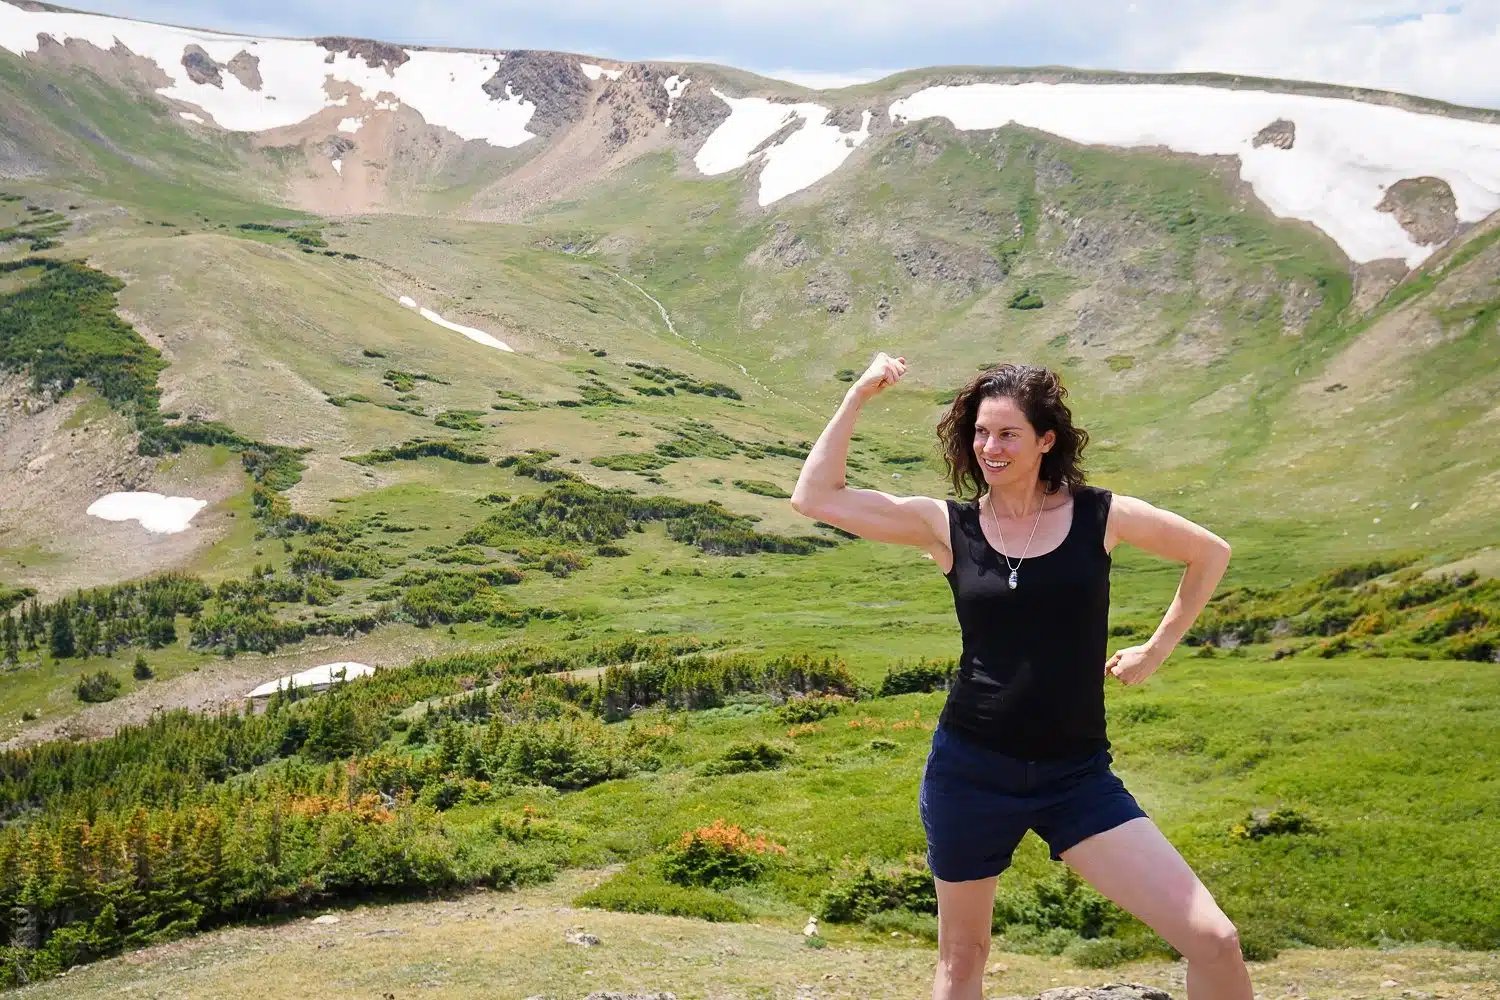 Flexing bicep muscles in Colorado Mountains: RMNP